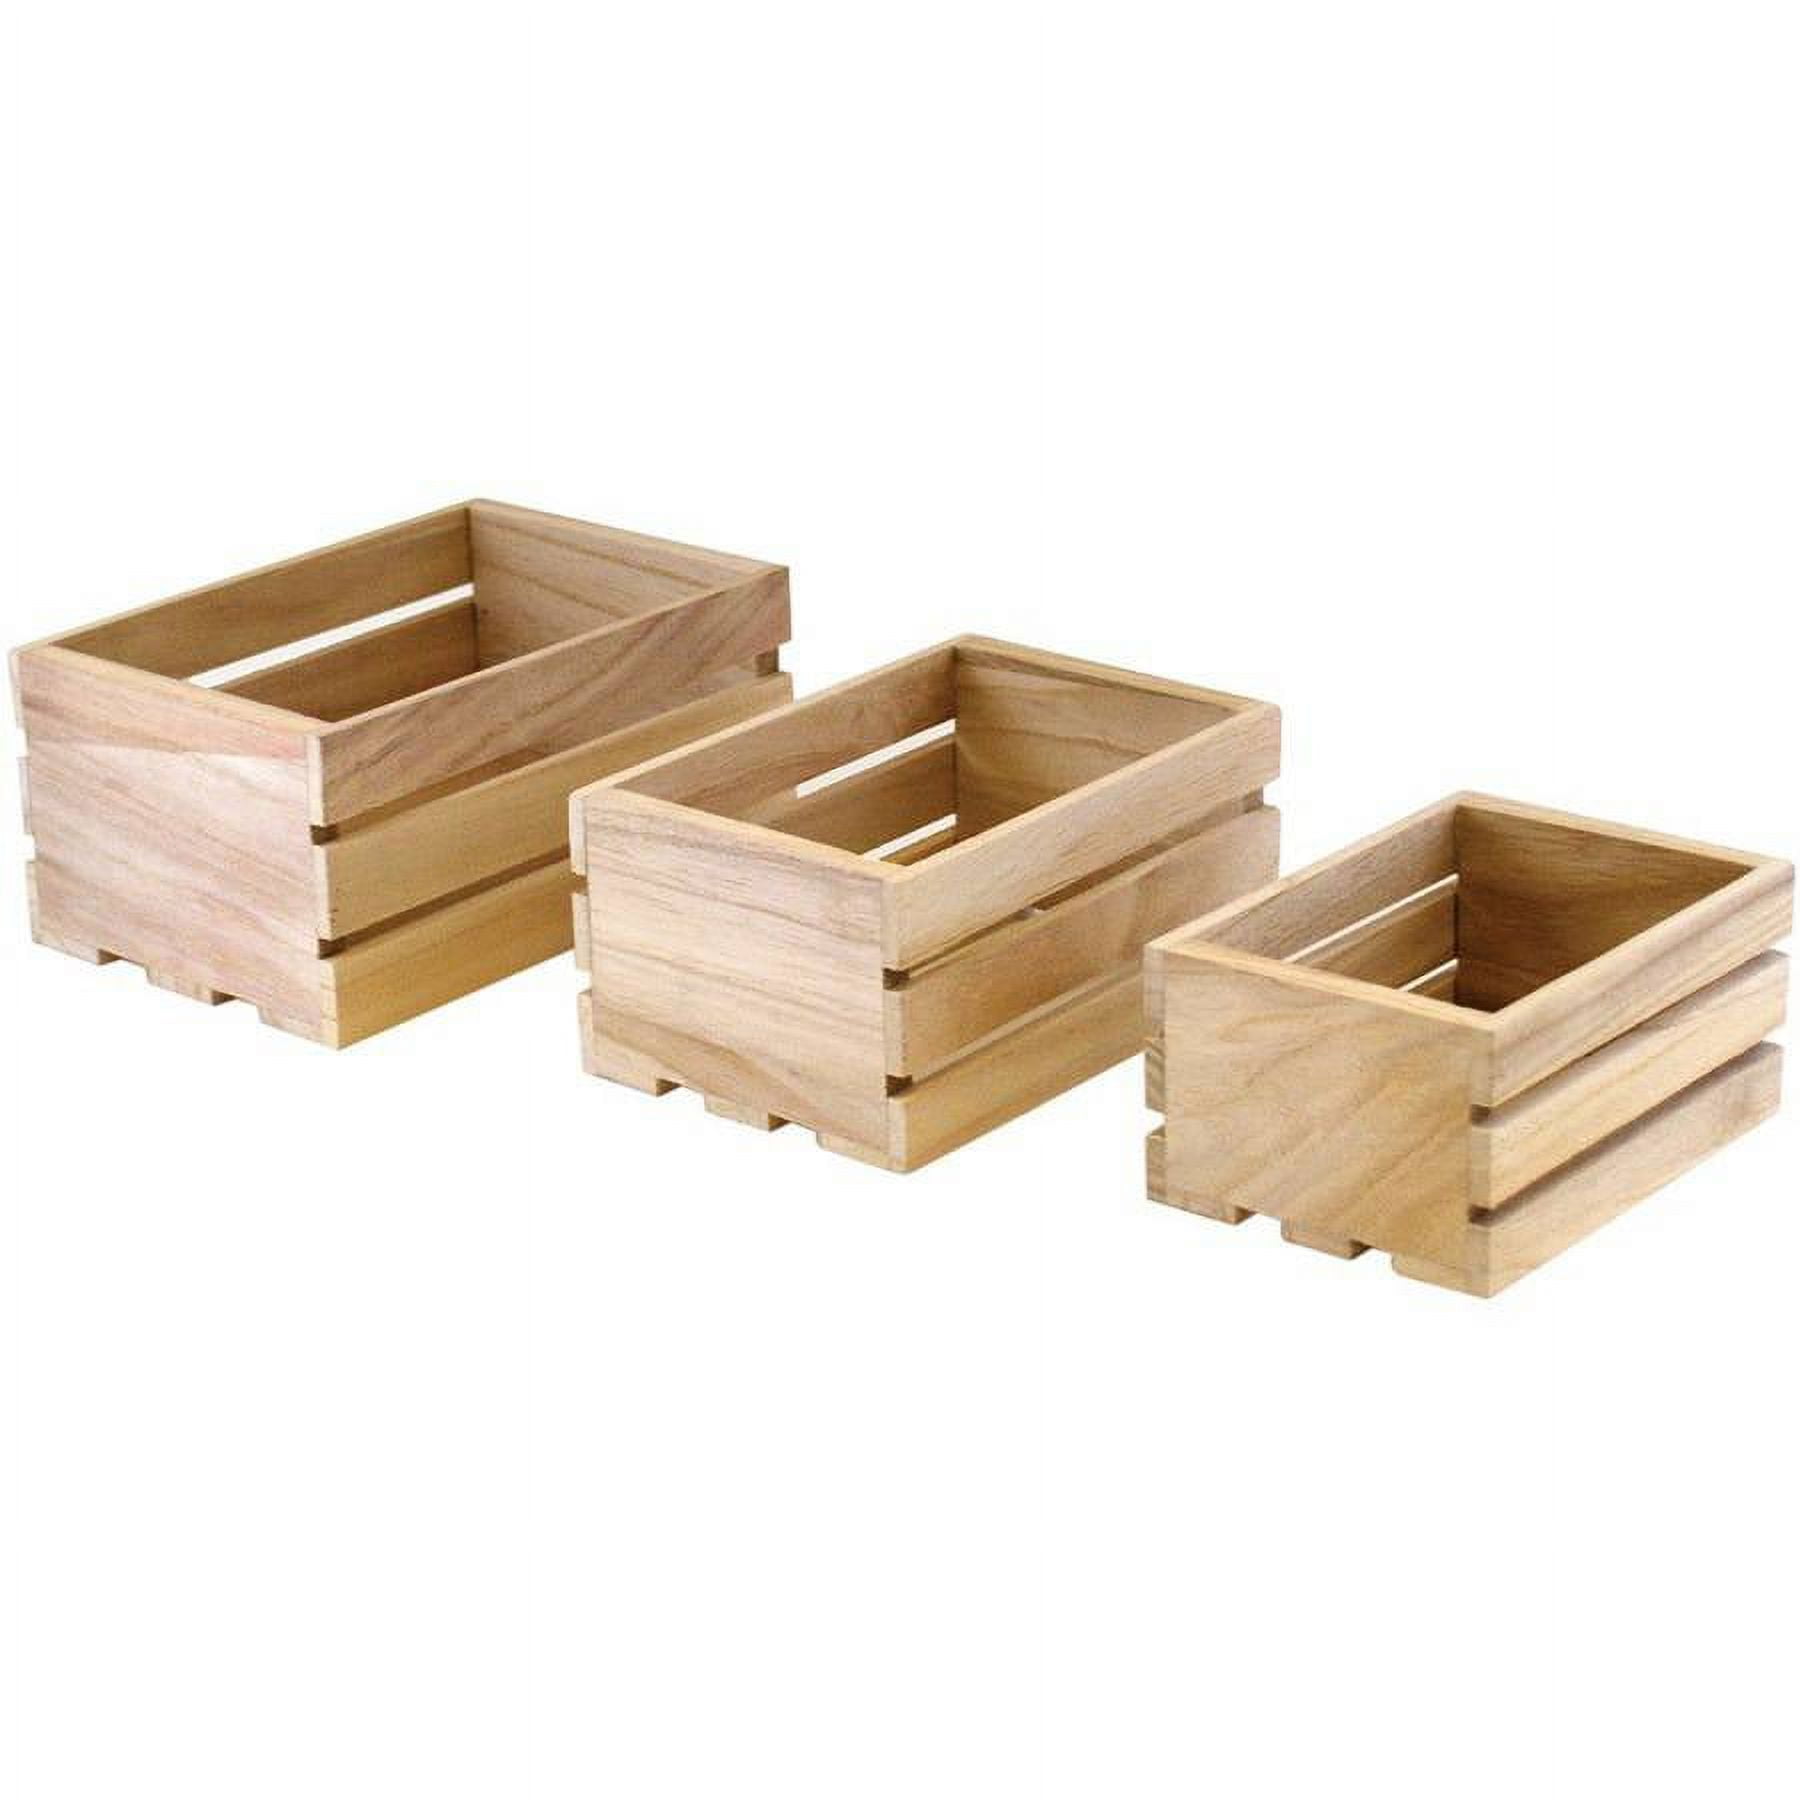 2x Wooden Sewing Box Sewing Accessories Storage Case for Sewing Beginner  Sewing Starter Portable Home Sew Basket Large x13.5x15cm